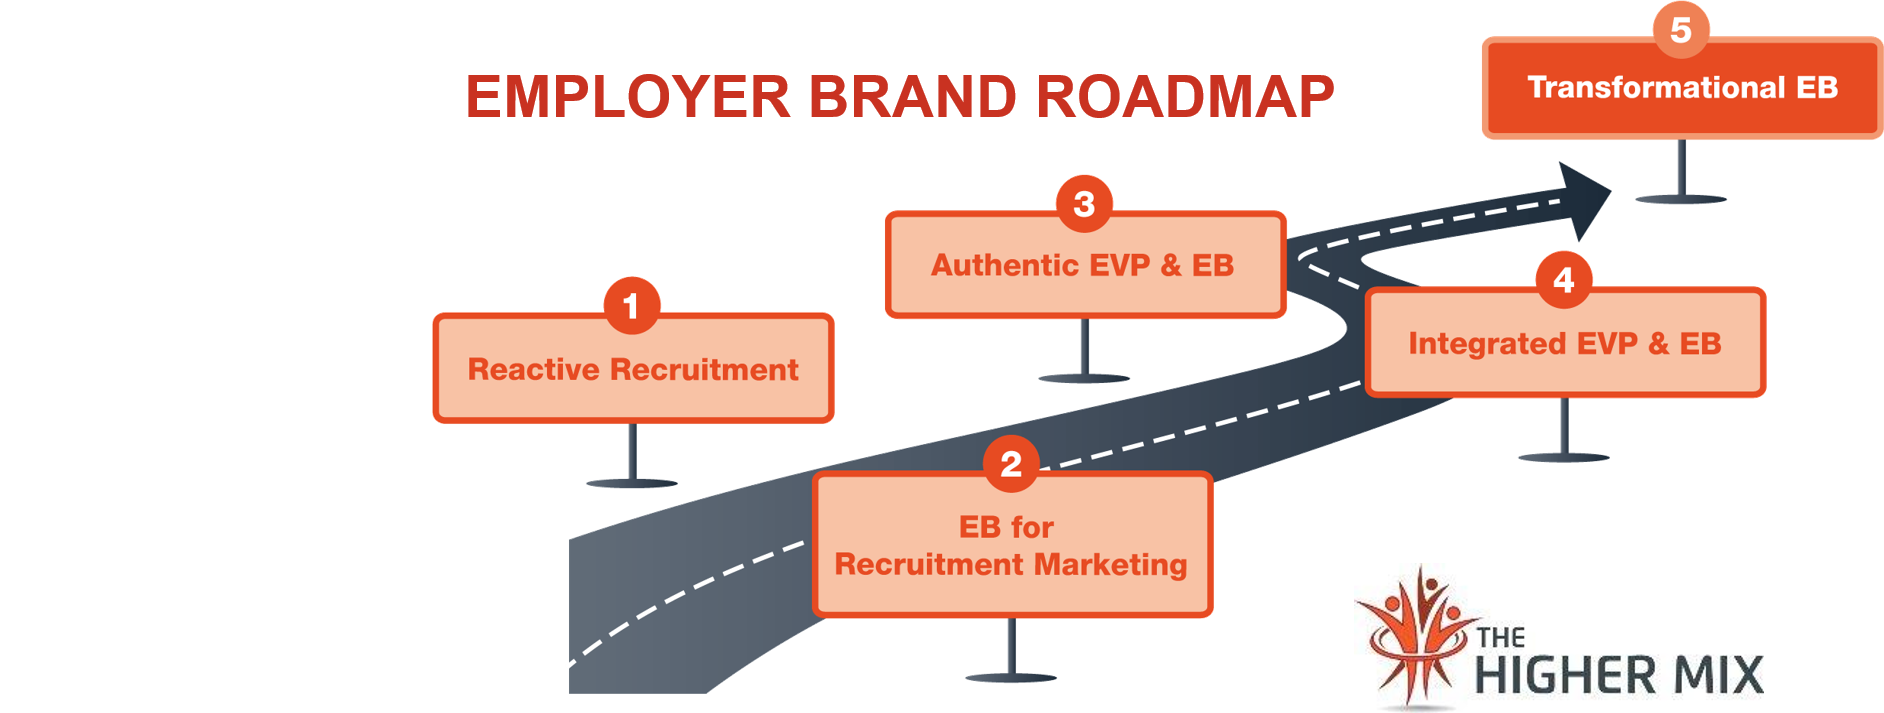 Employer Branding Roadmap  Journey to sophisticated Employer Brand   The Higher Mix